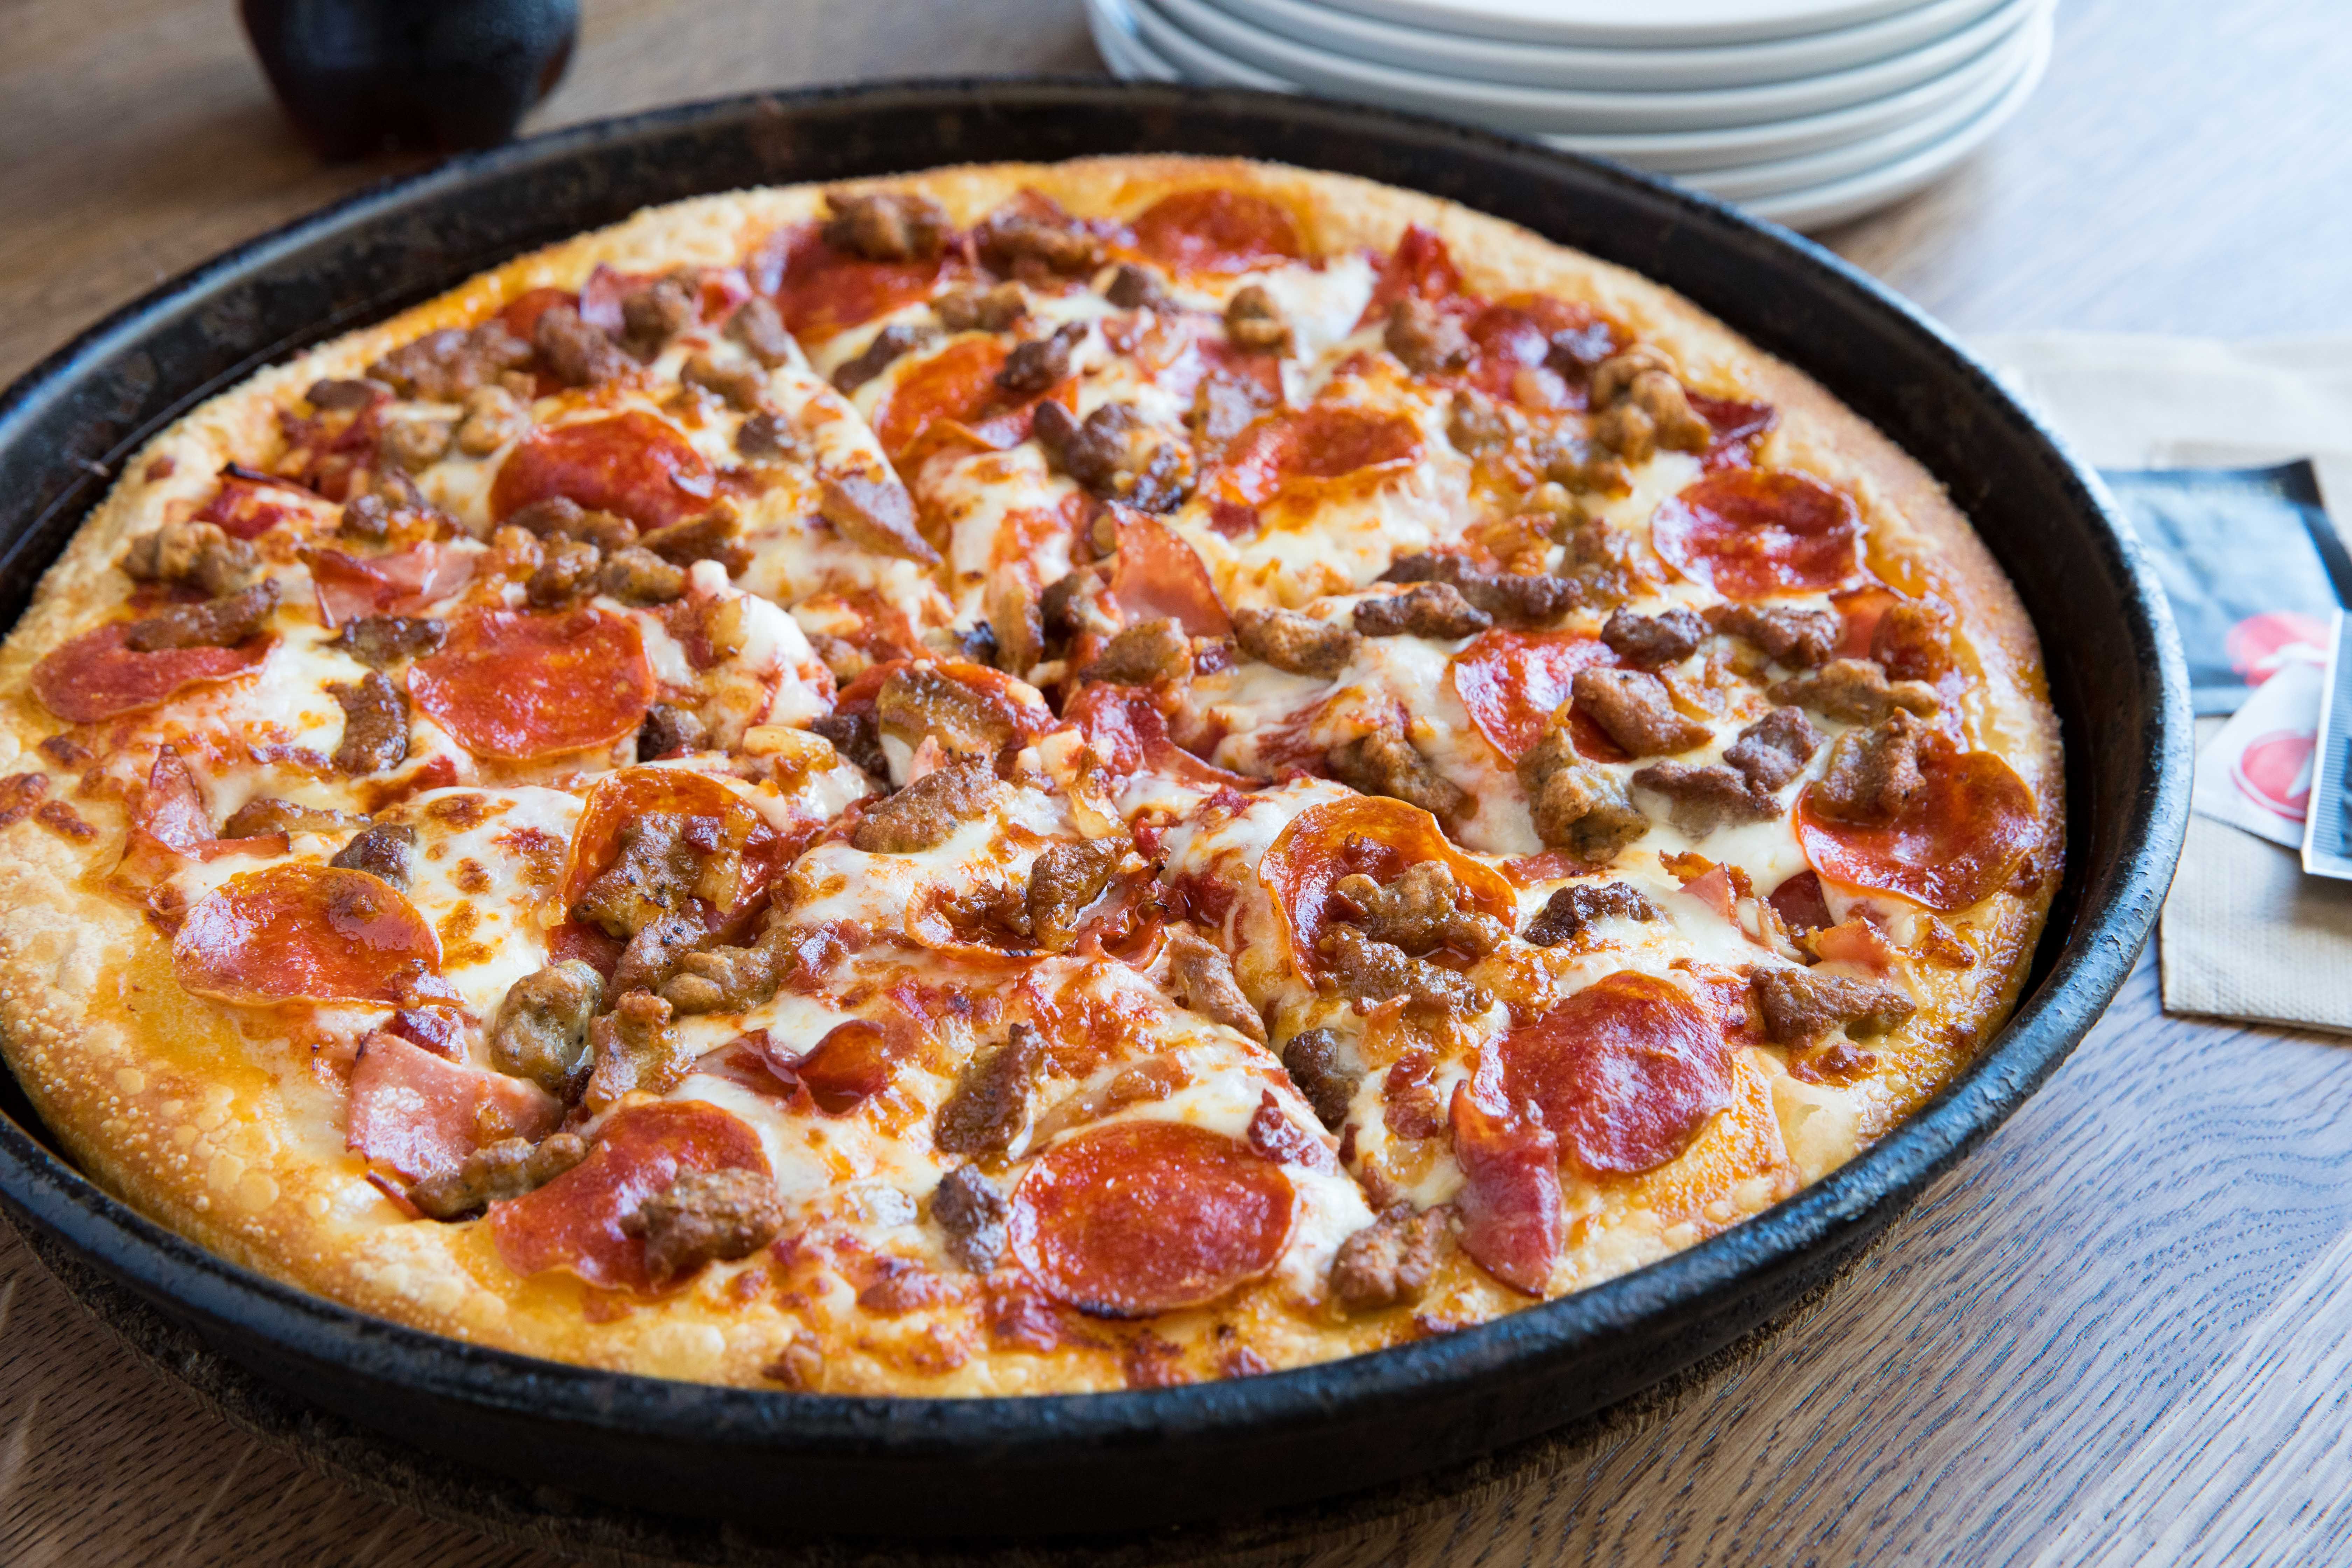 Pizza Hut Has A Large, Three-Topping Pan Pizza For